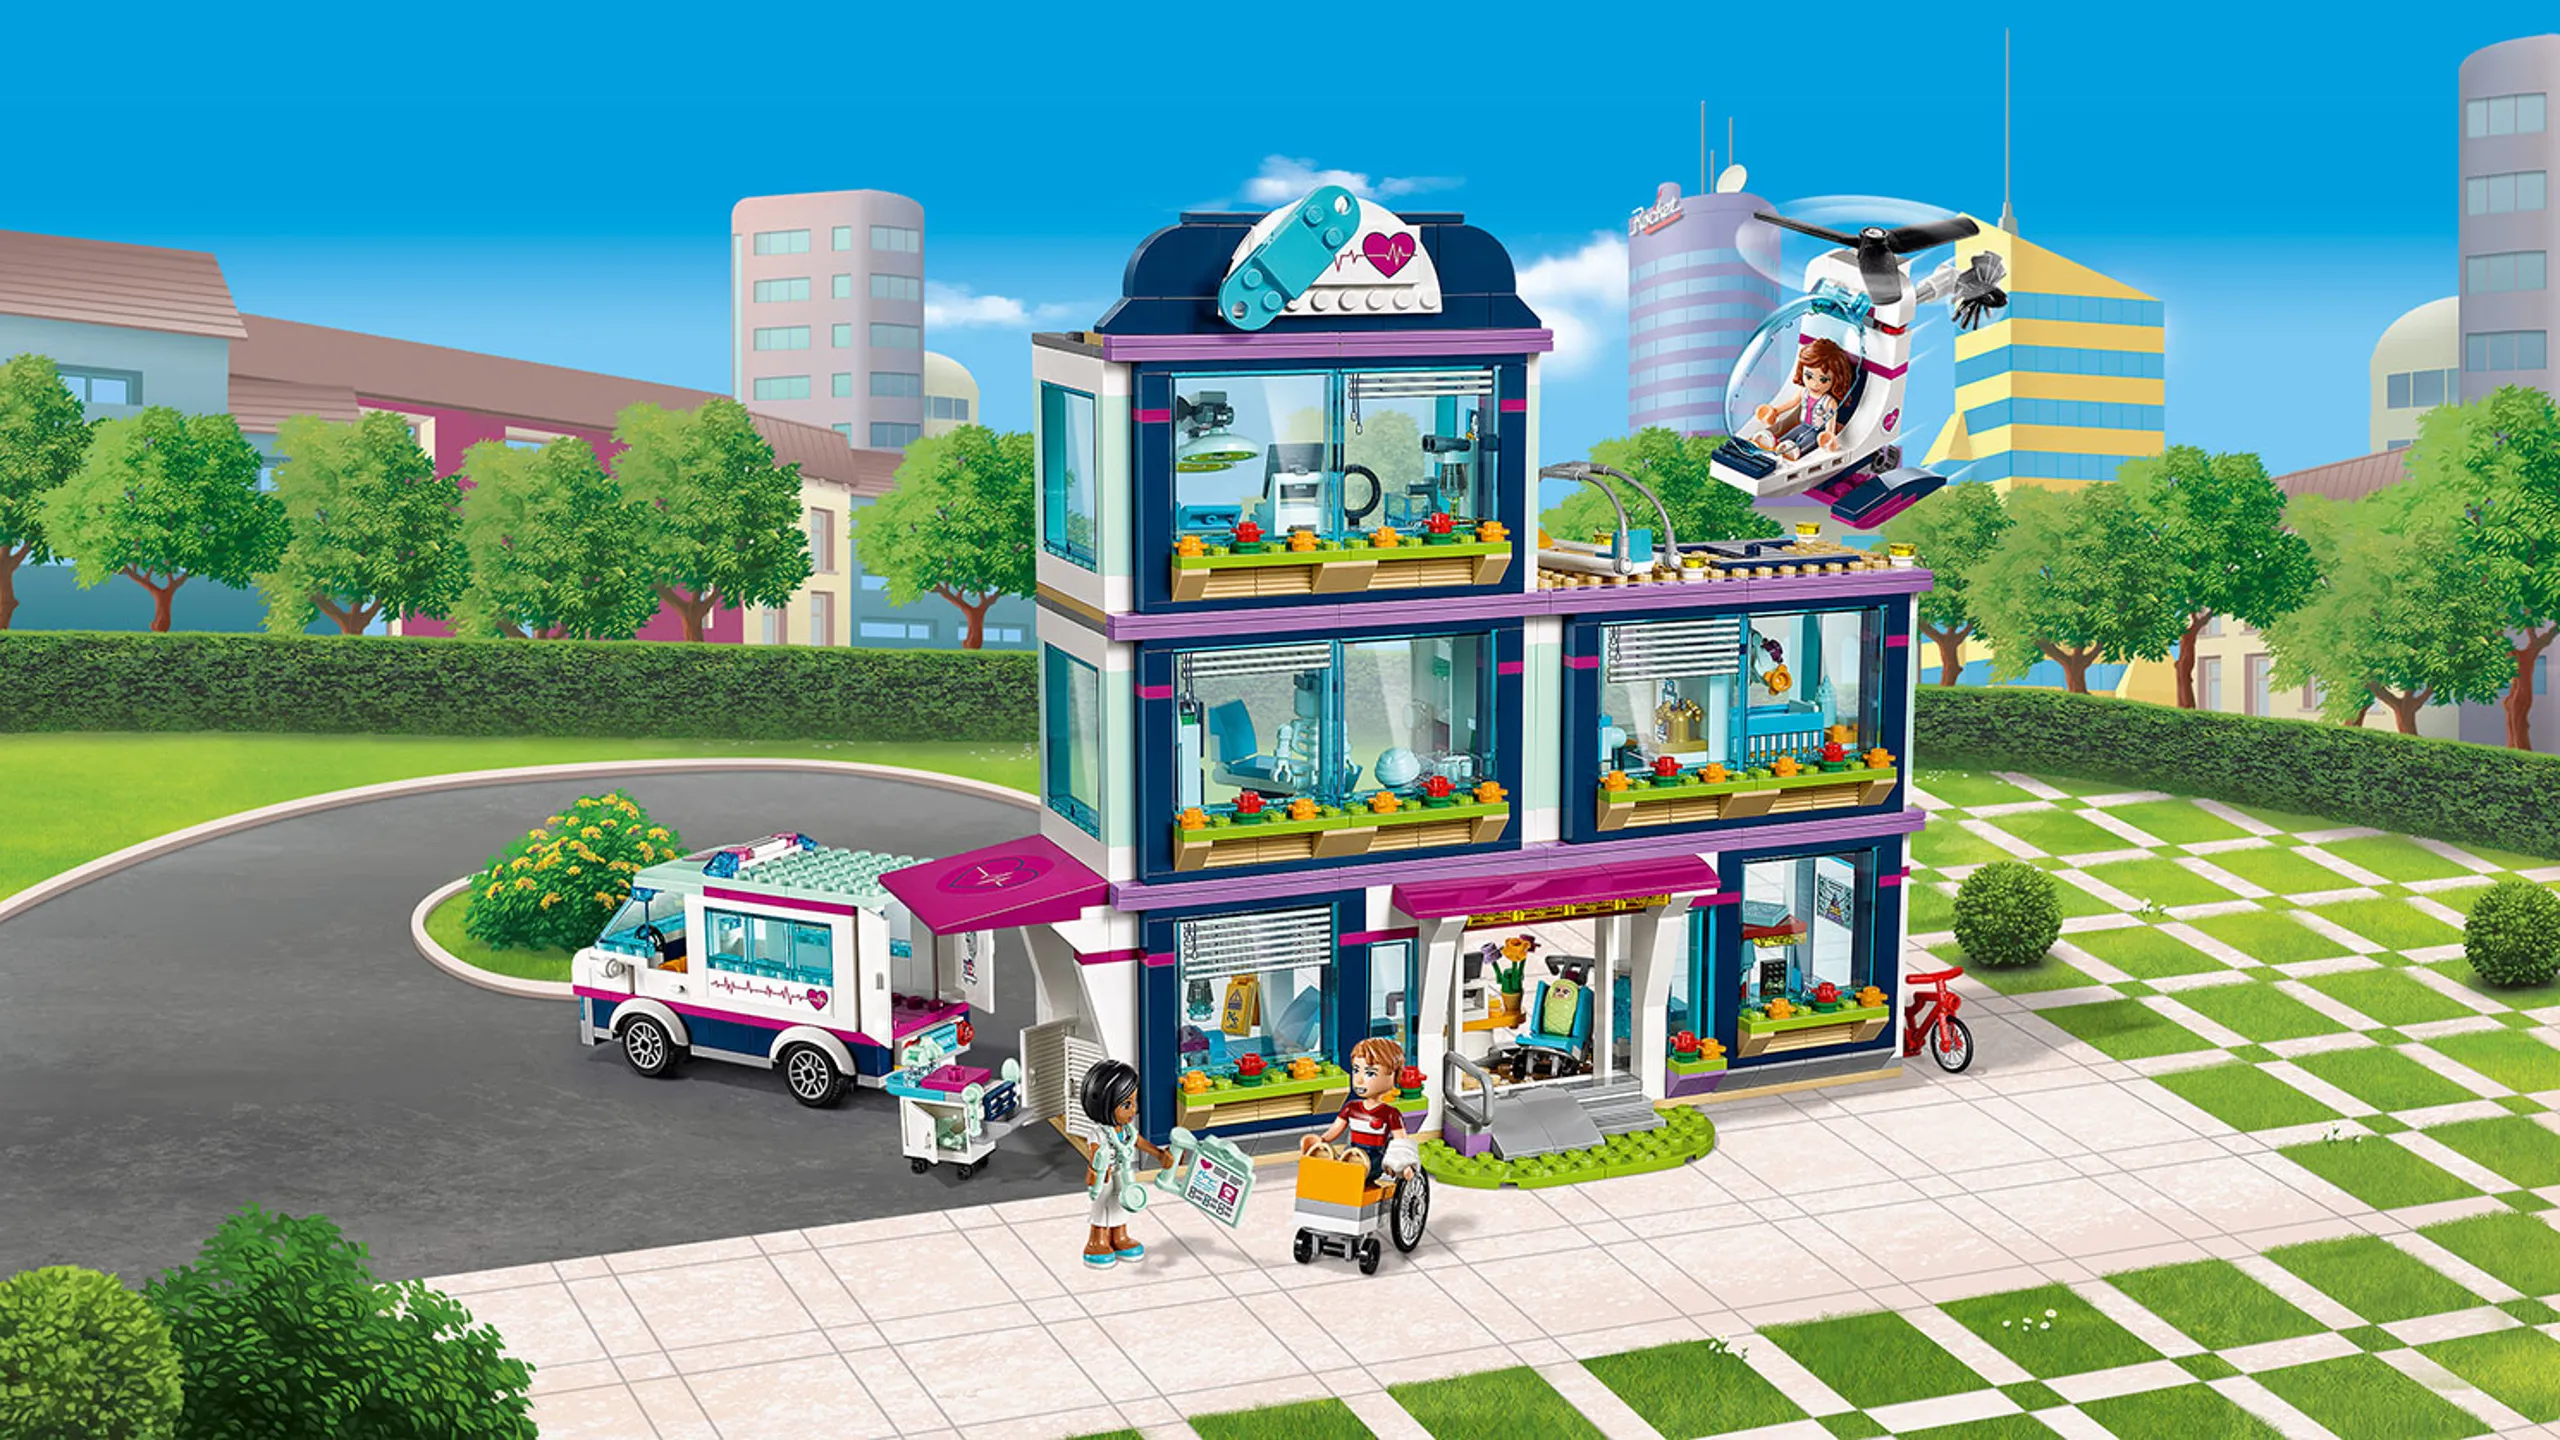 LEGO Friends - 41318 Heartlake Hospital - Outside the hospital a doctor receives a boy in wheelchair, the ambulance has arrived and Olivia flies the hospital helicopter.